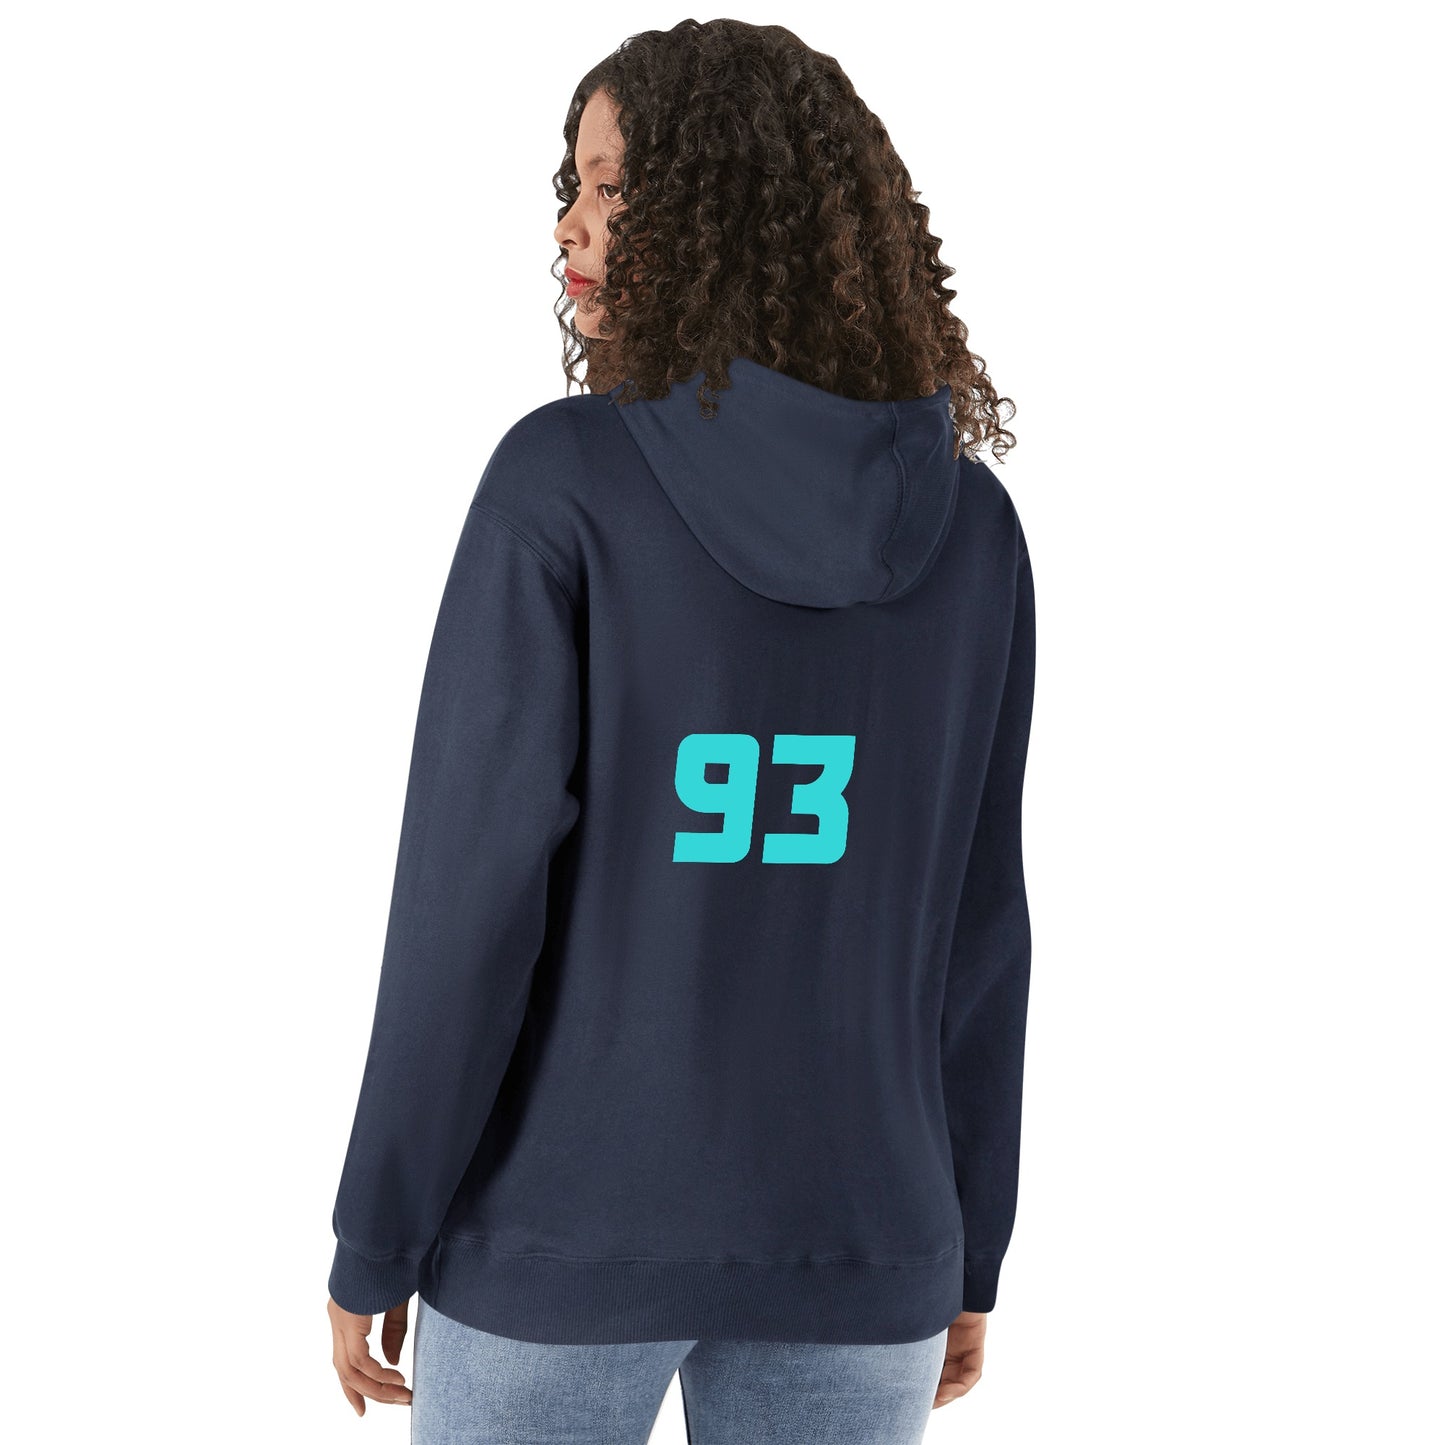 Unisex Front & Back Printing Cotton Hoodie 